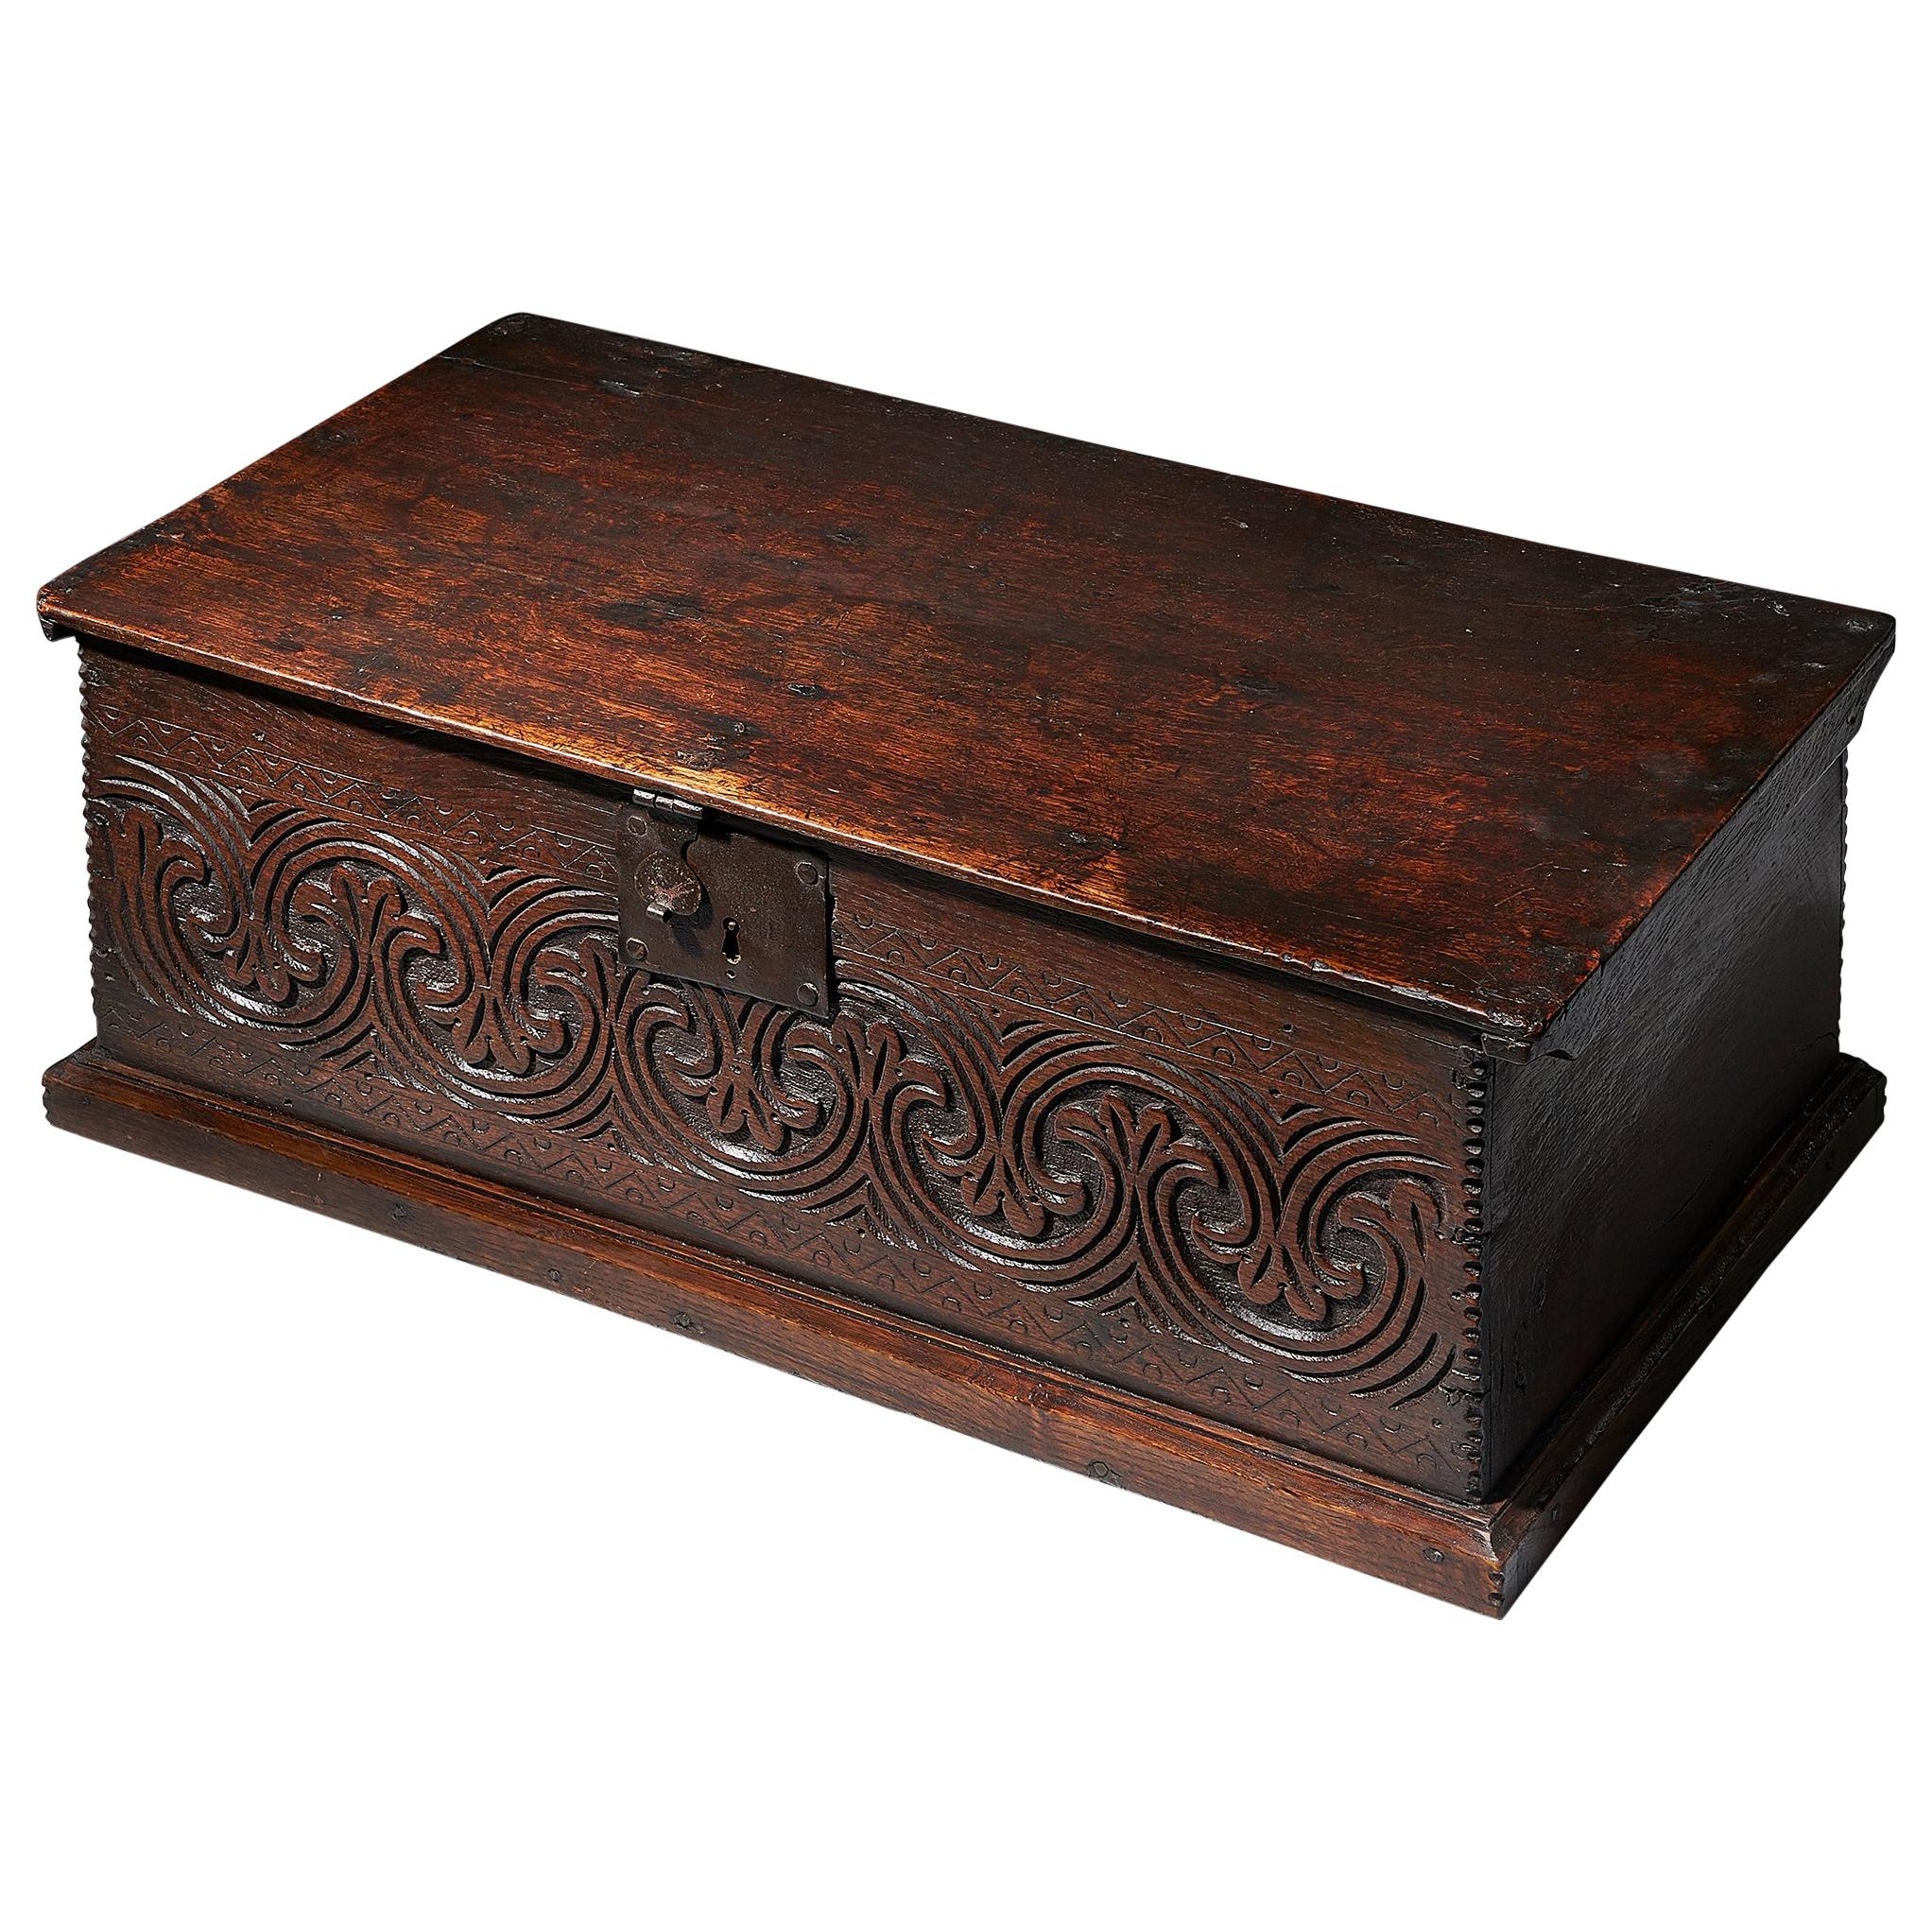 Late 17th Century Charles II Carved Oak Bible, Deed, Blanket, or Candle Box